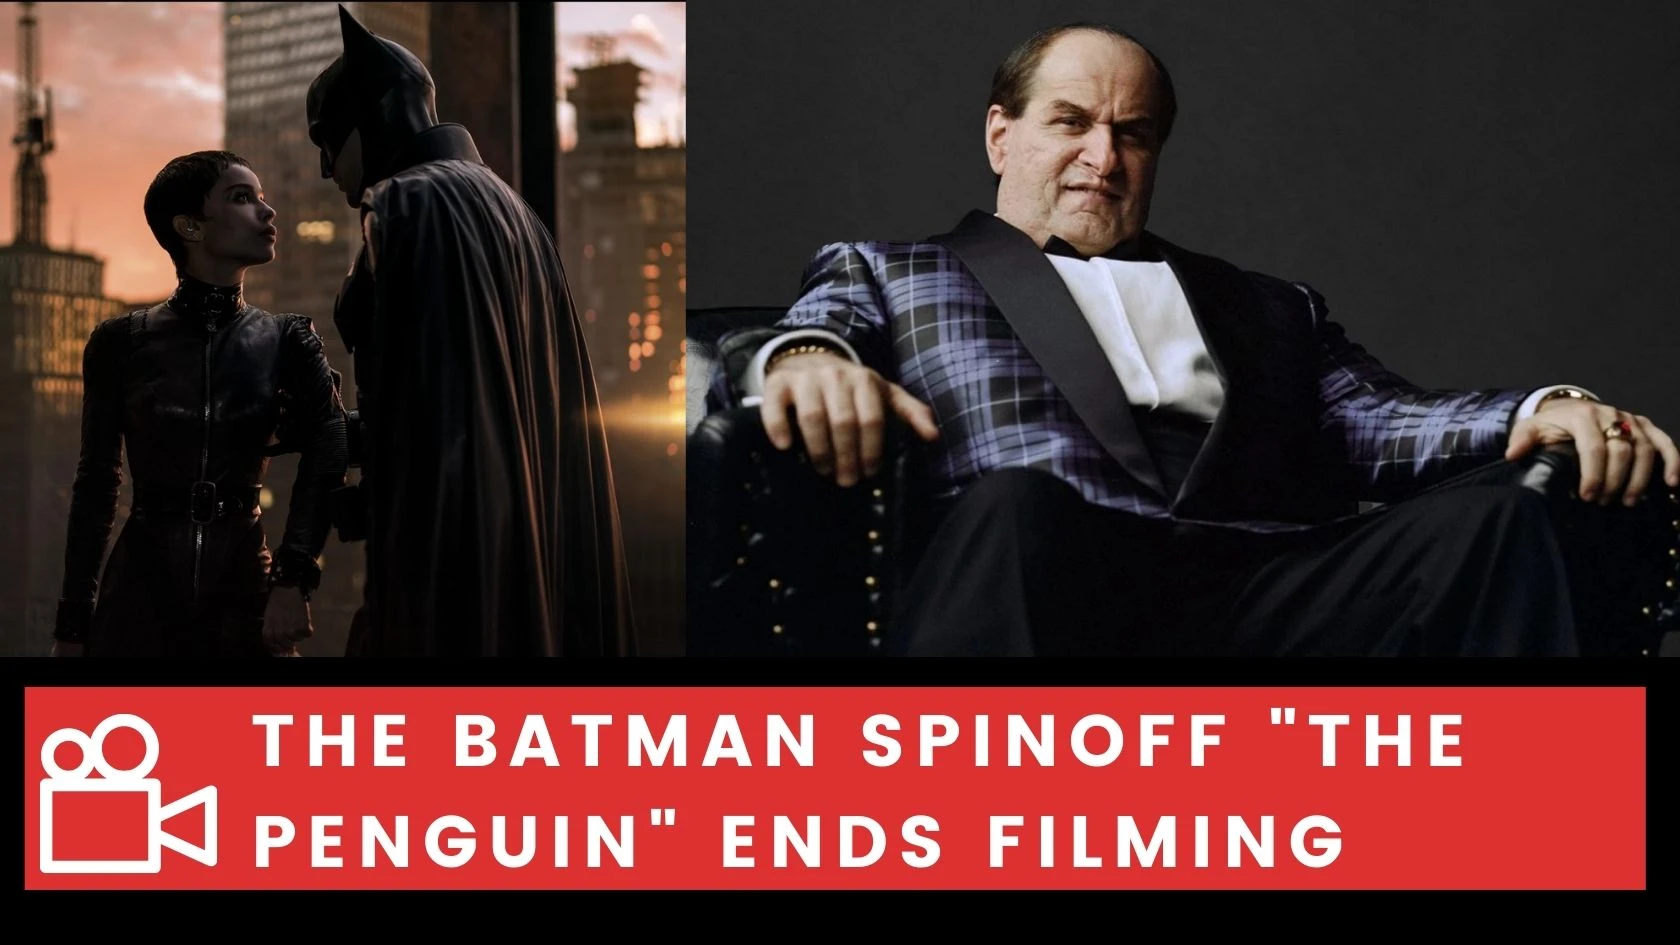 The Batman spinoff _The Penguin_ ends Filming